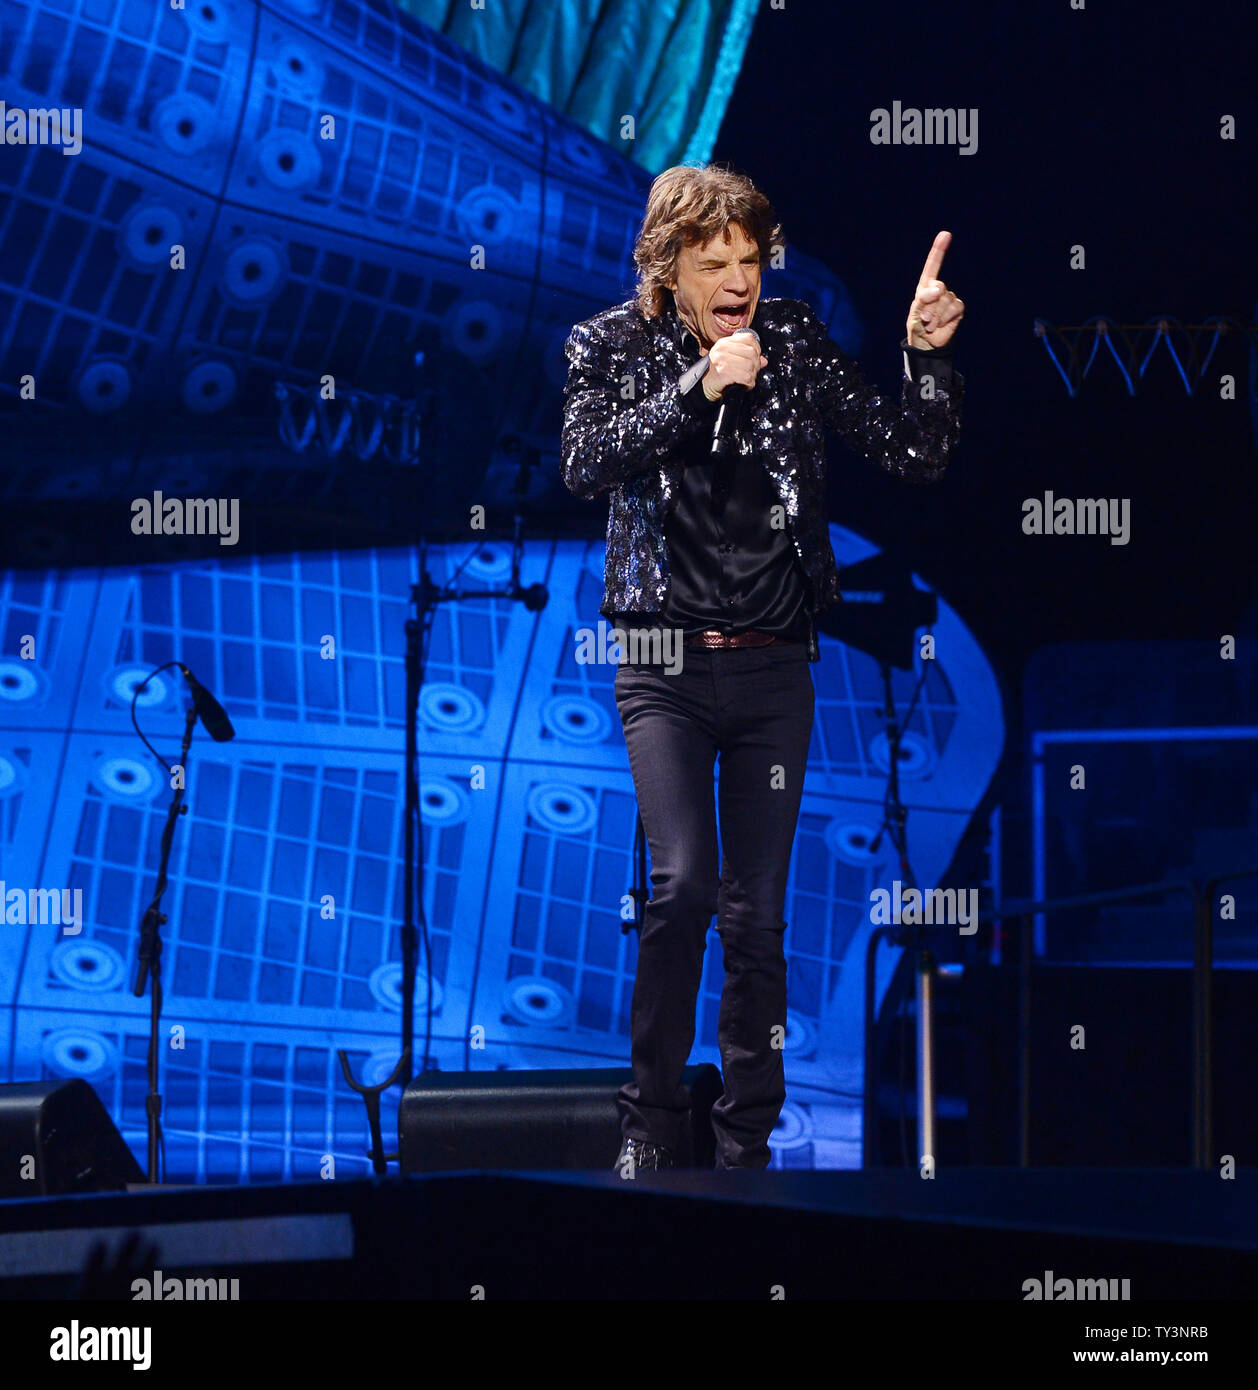 Mick Jagger of the Rolling Stones performs "It's Only Rock 'N' Roll (But I Like It)" onstage as part of the group's '50 and Counting' tour at Staples Center in Los Angeles on May 20, 2013.  UPI/Jim Ruymen Stock Photo